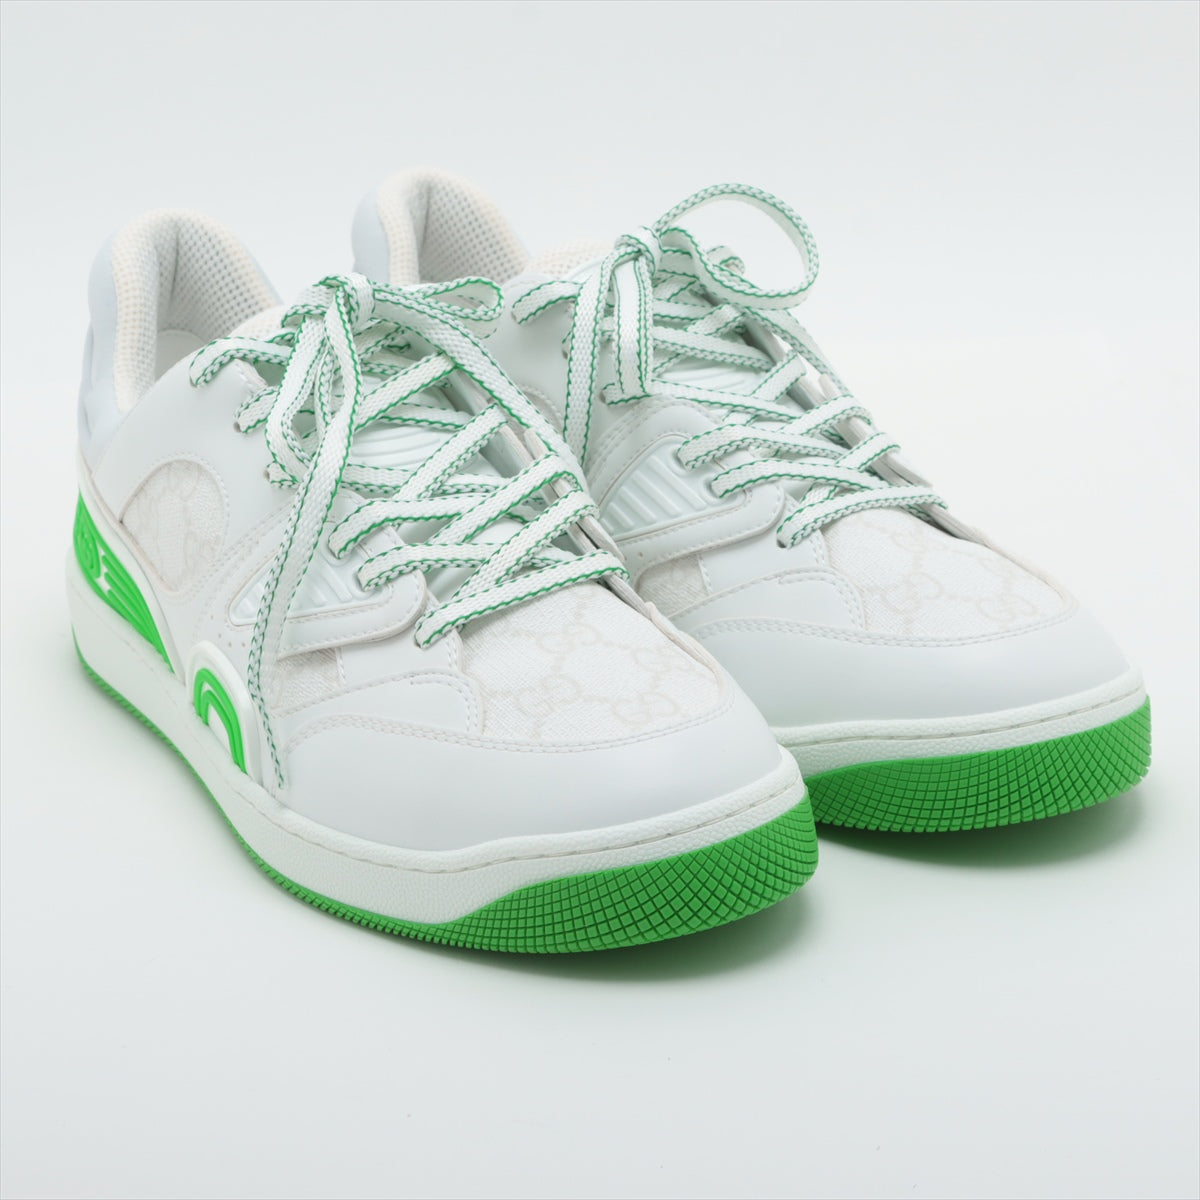 Gucci Basket PVC & leather Sneakers 7.5 Men's White x green GG Supreme Replaceable cord box There is a storage bag